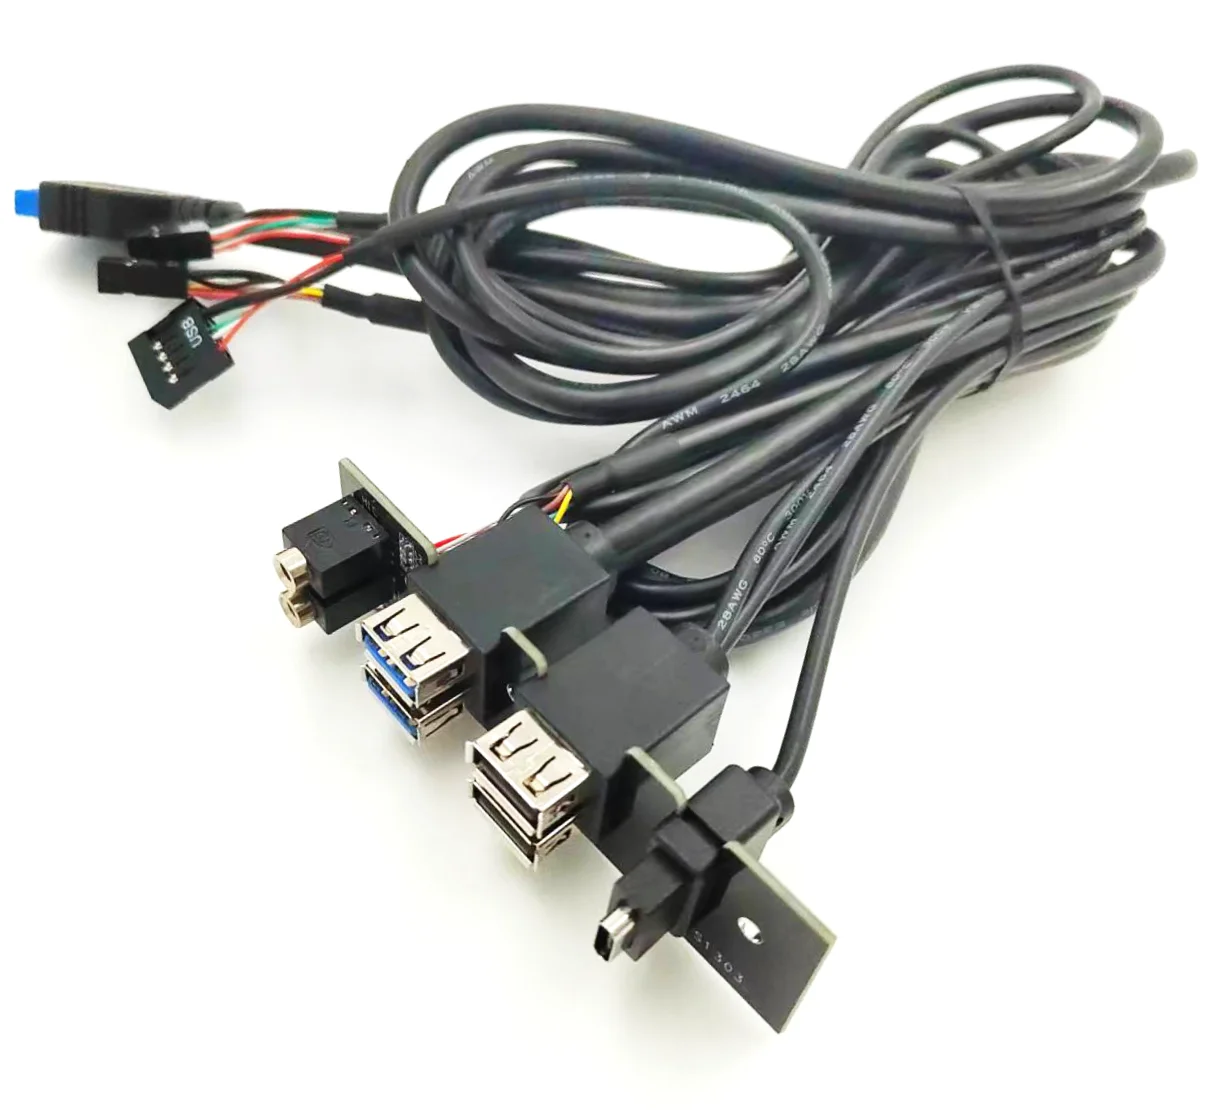 Mini Desktop Front Panel Port Cable With 2USB 3.0 and 2USB2.0 and Type C and HD Audio Port For PC Case